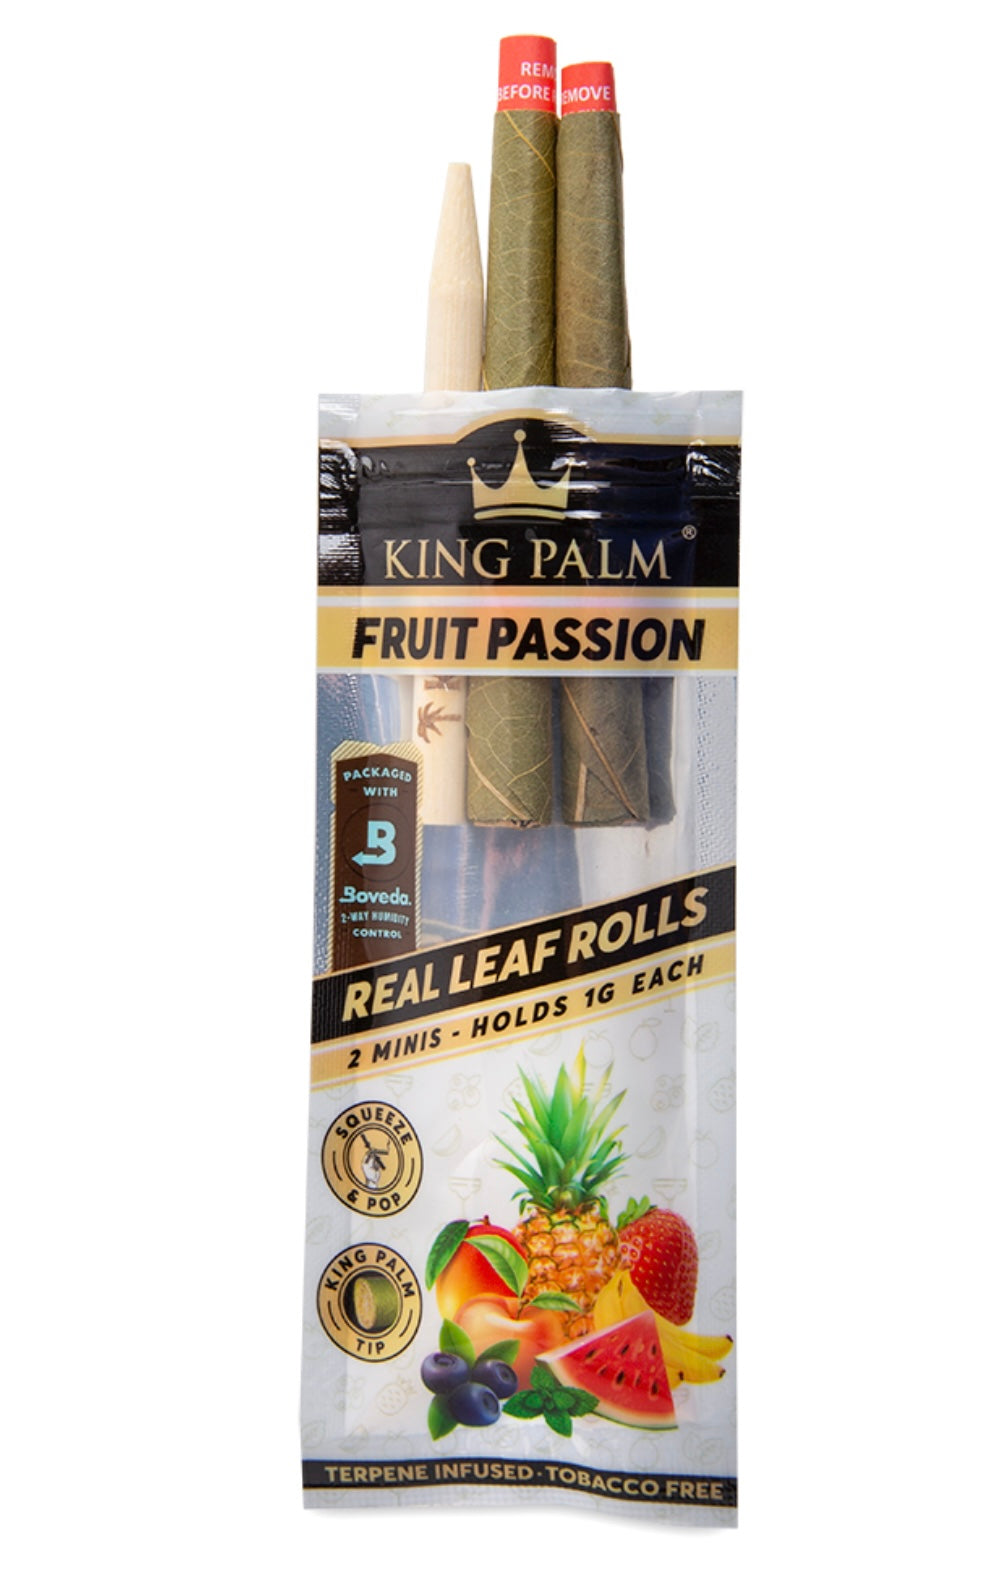 KING PALM 2 Slim Rolls Fruit Passion yoga smokes yoga studio, delivery, delivery near me, yoga smokes smoke shop, find smoke shop, head shop near me, yoga studio, headshop, head shop, local smoke shop, psl, psl smoke shop, smoke shop, smokeshop, yoga, yoga studio, dispensary, local dispensary, smokeshop near me, port saint lucie, florida, port st lucie, lounge, life, highlife, love, stoned, highsociety. Yoga Smokes